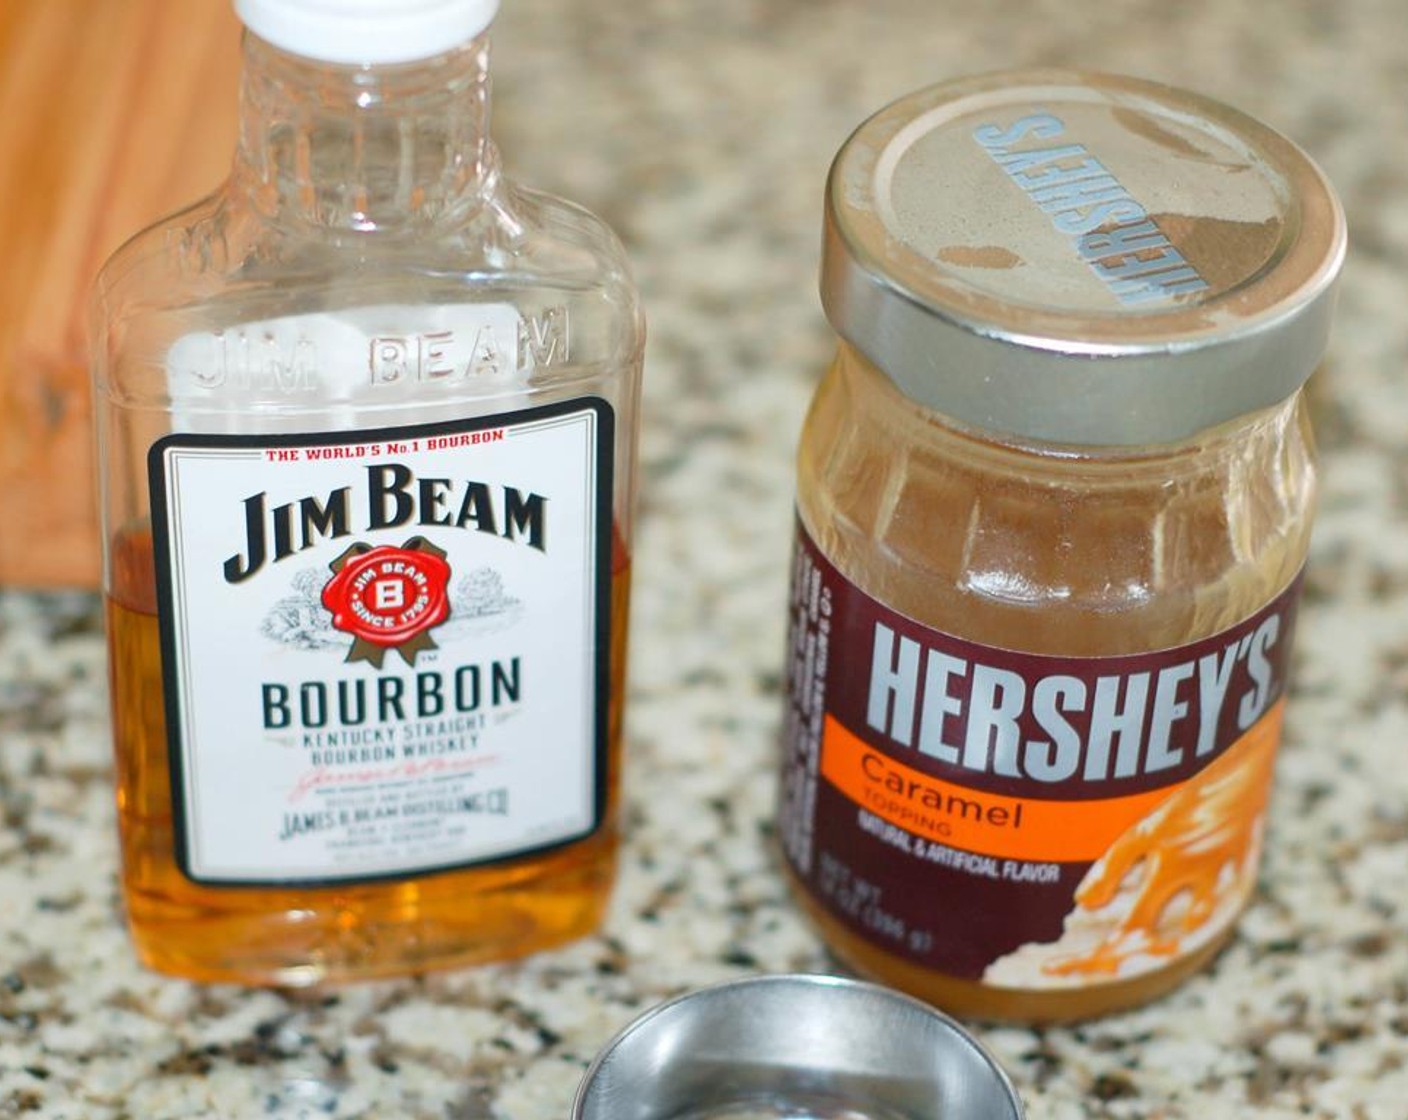 step 11 In a small bowl, whisk together the Caramel Sauce (1/4 cup) and Bourbon (1 tsp).